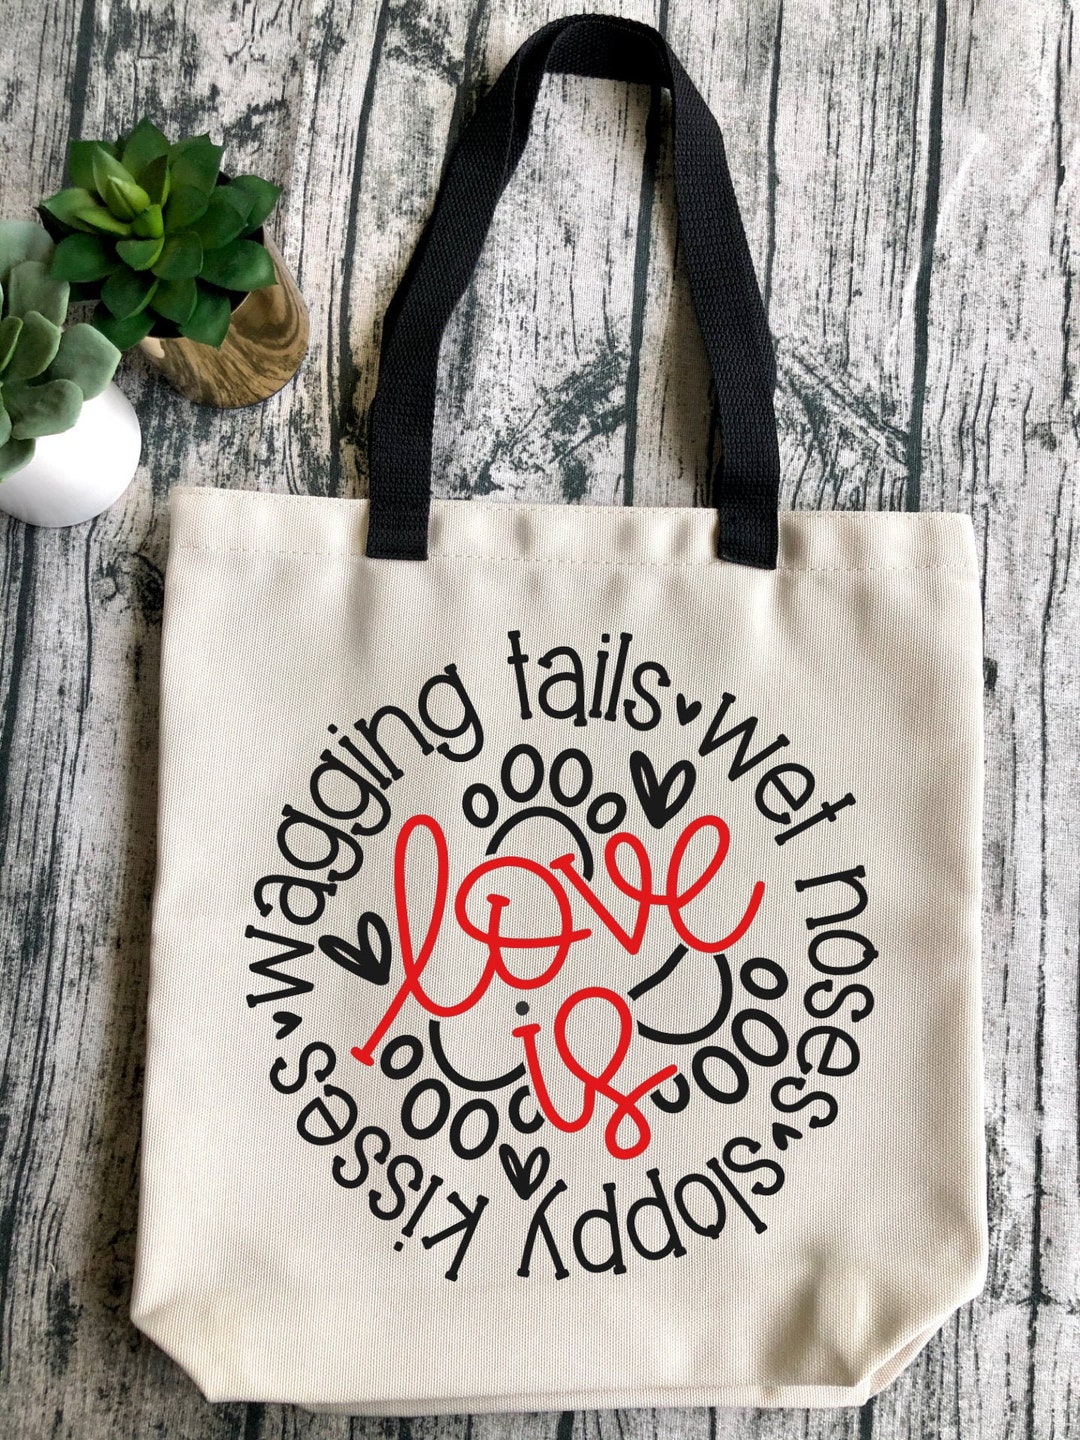 Love is Wet Noses Sloppy Kisses Wagging Tails Dog Small/ Large - Etsy